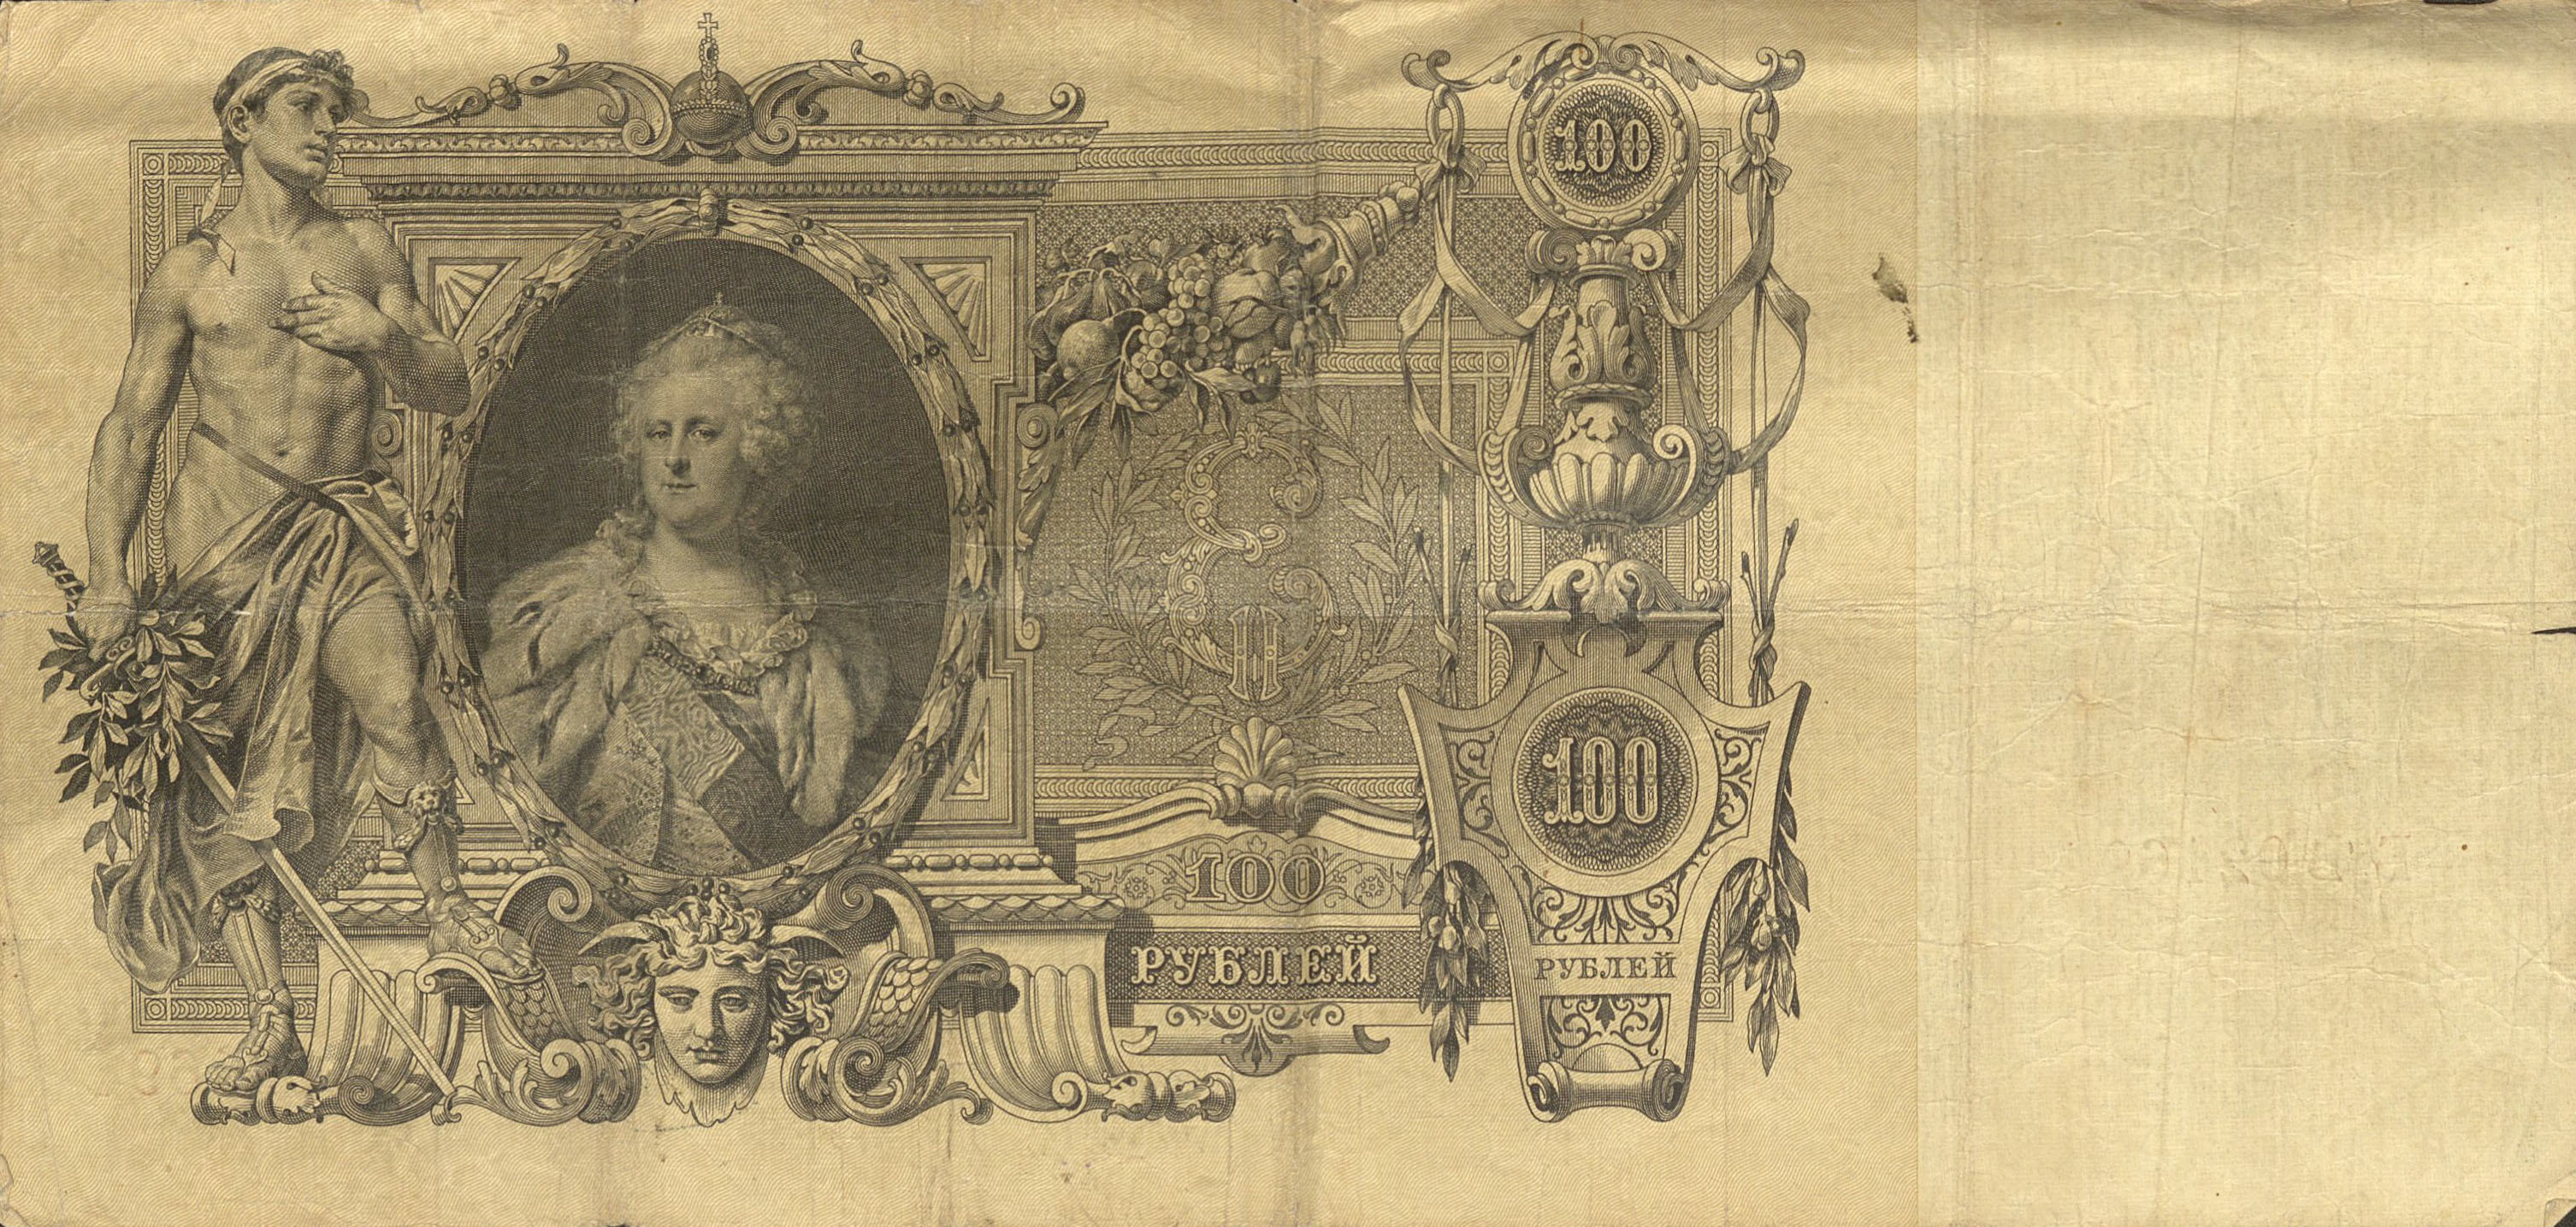 Russian banknote of 100 rubles